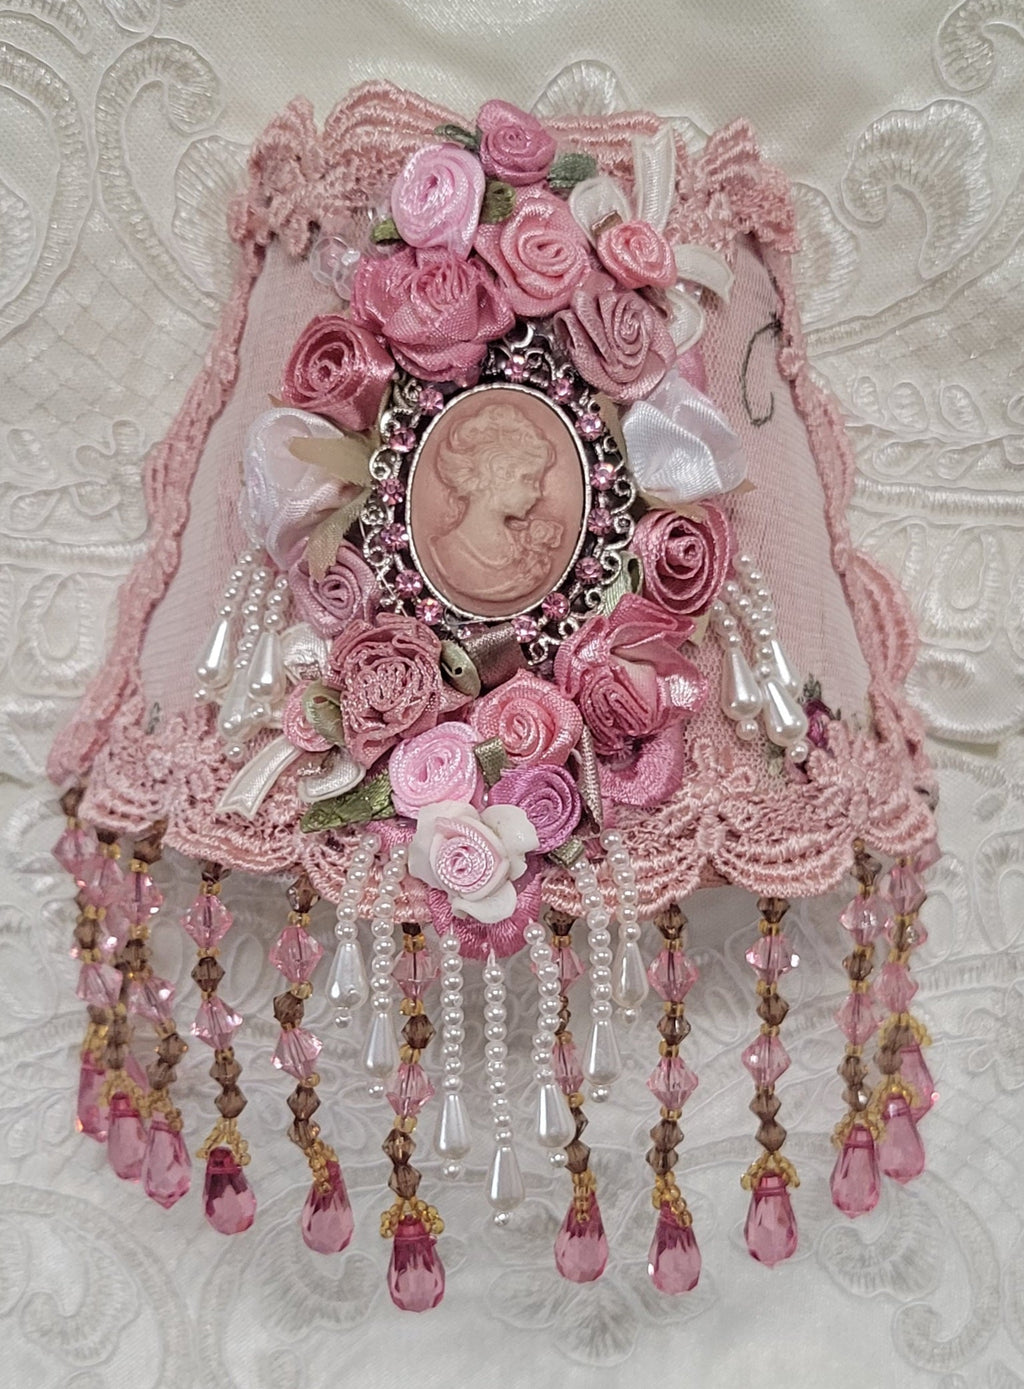 Princess Pink Victorian Cameo Lace and Hand Beaded Fringe Nightlight (night light) - One of a Kind!